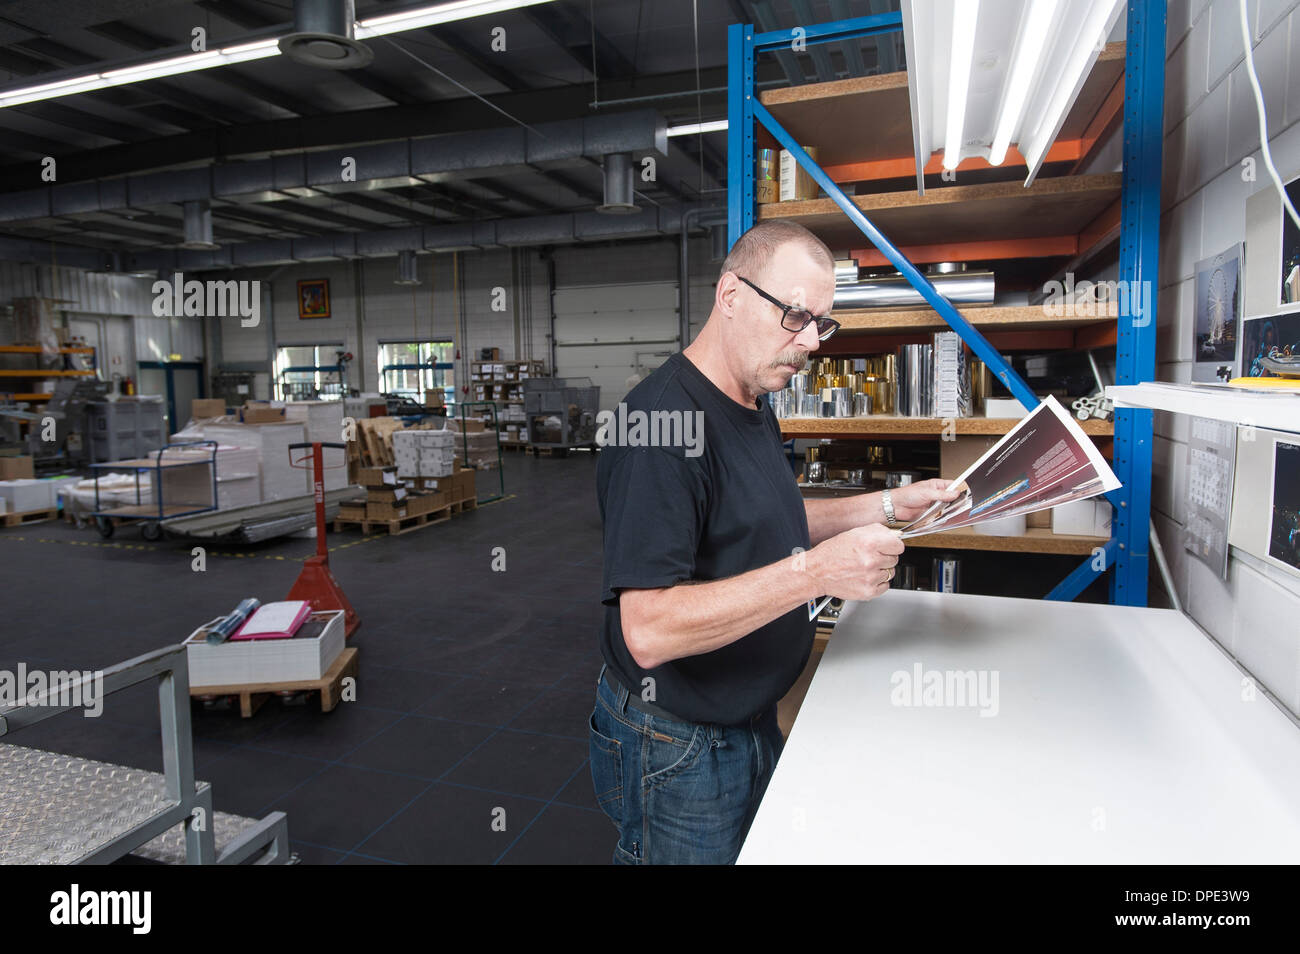 Worker checking quality of print products in printing workshop Stock Photo